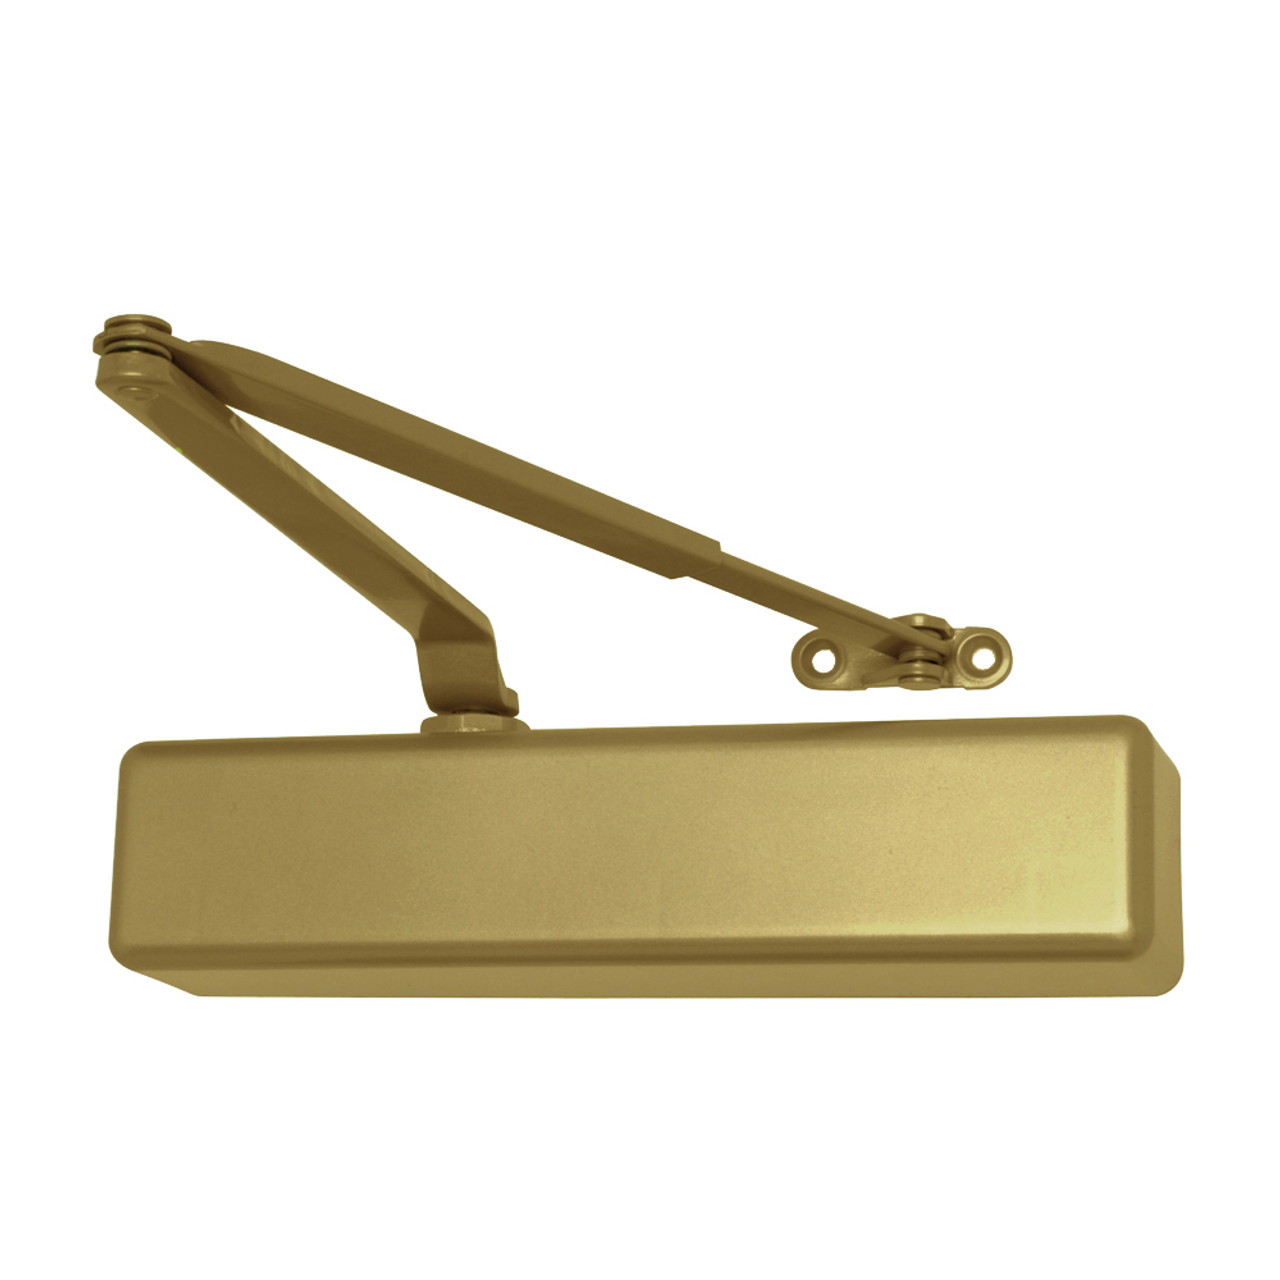 1461-HD-PA-LTBRZ LCN Door Closer Heavy Duty with Parallel Arm in Light Bronze Finish